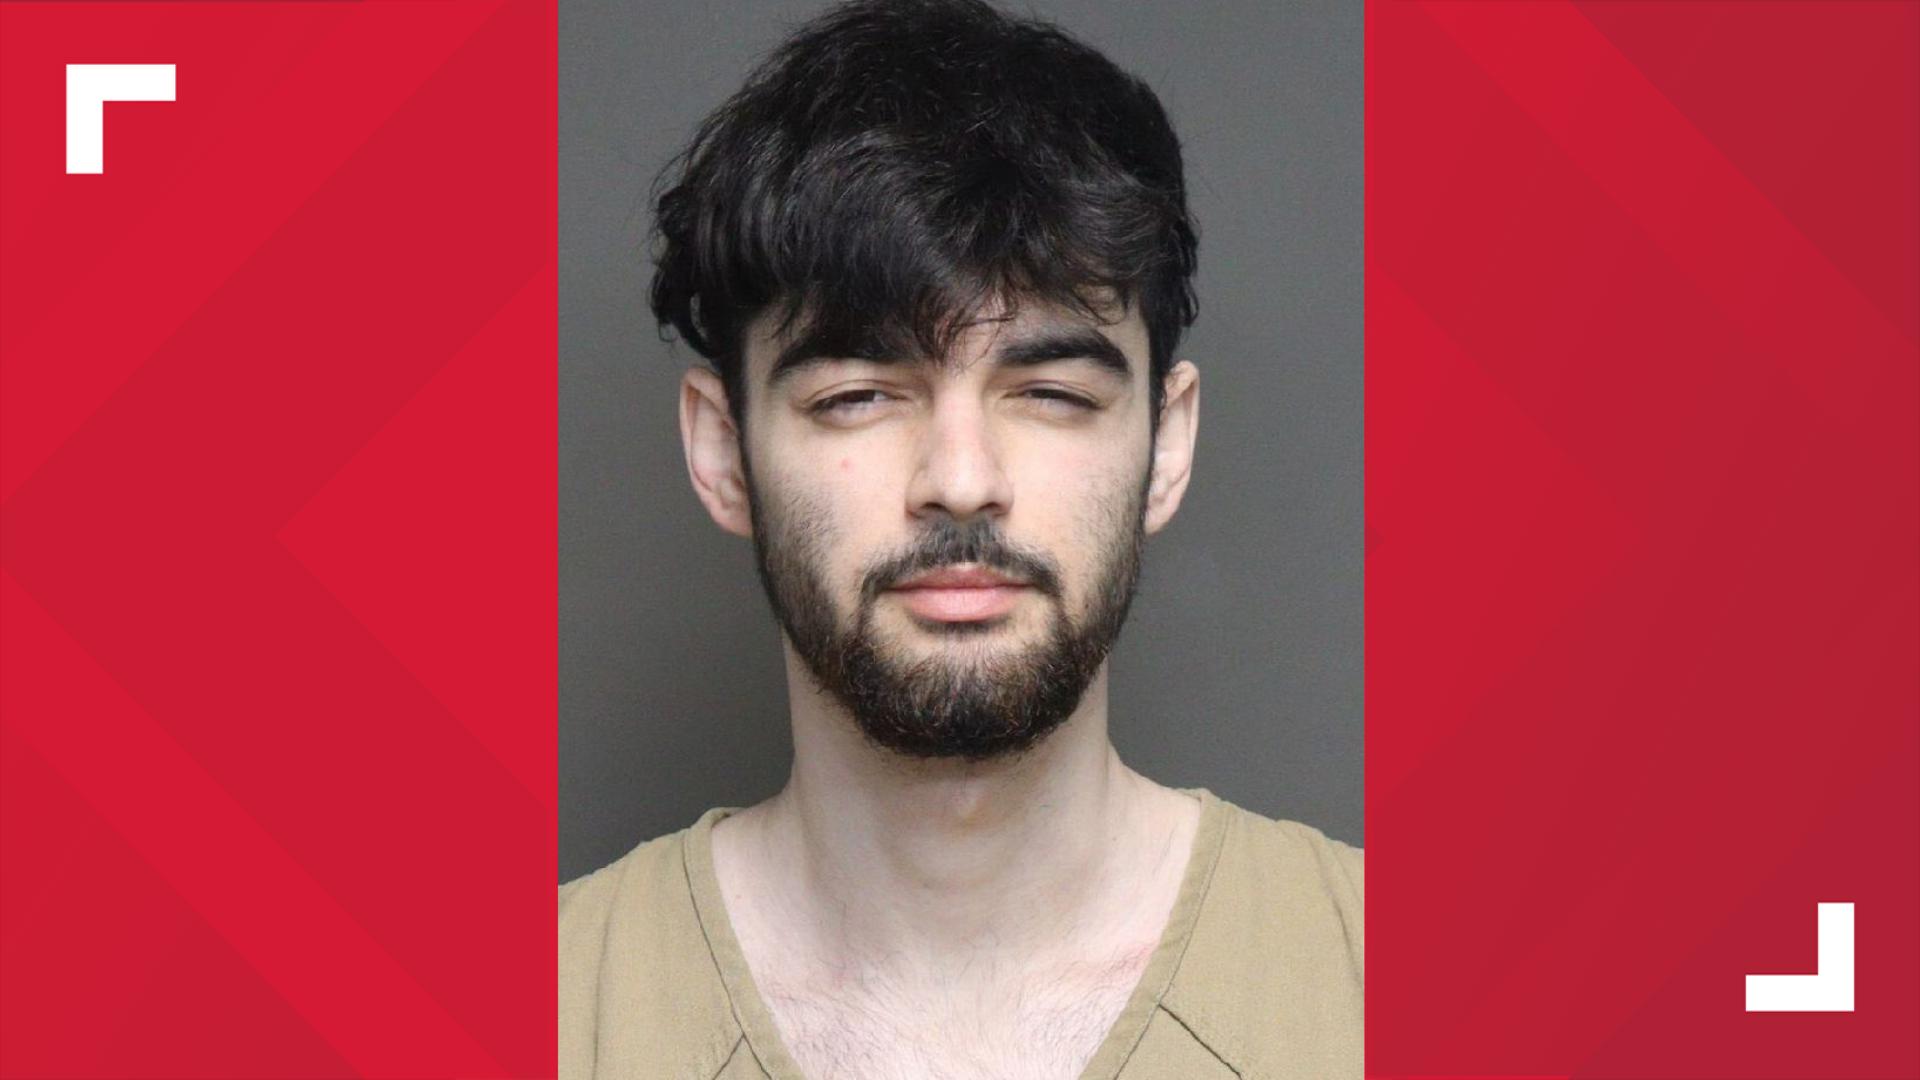 A Franklin County judge set a $2 million bond for a man charged in the deadly shooting of an 18-year-old woman at an apartment complex near Dublin last week.